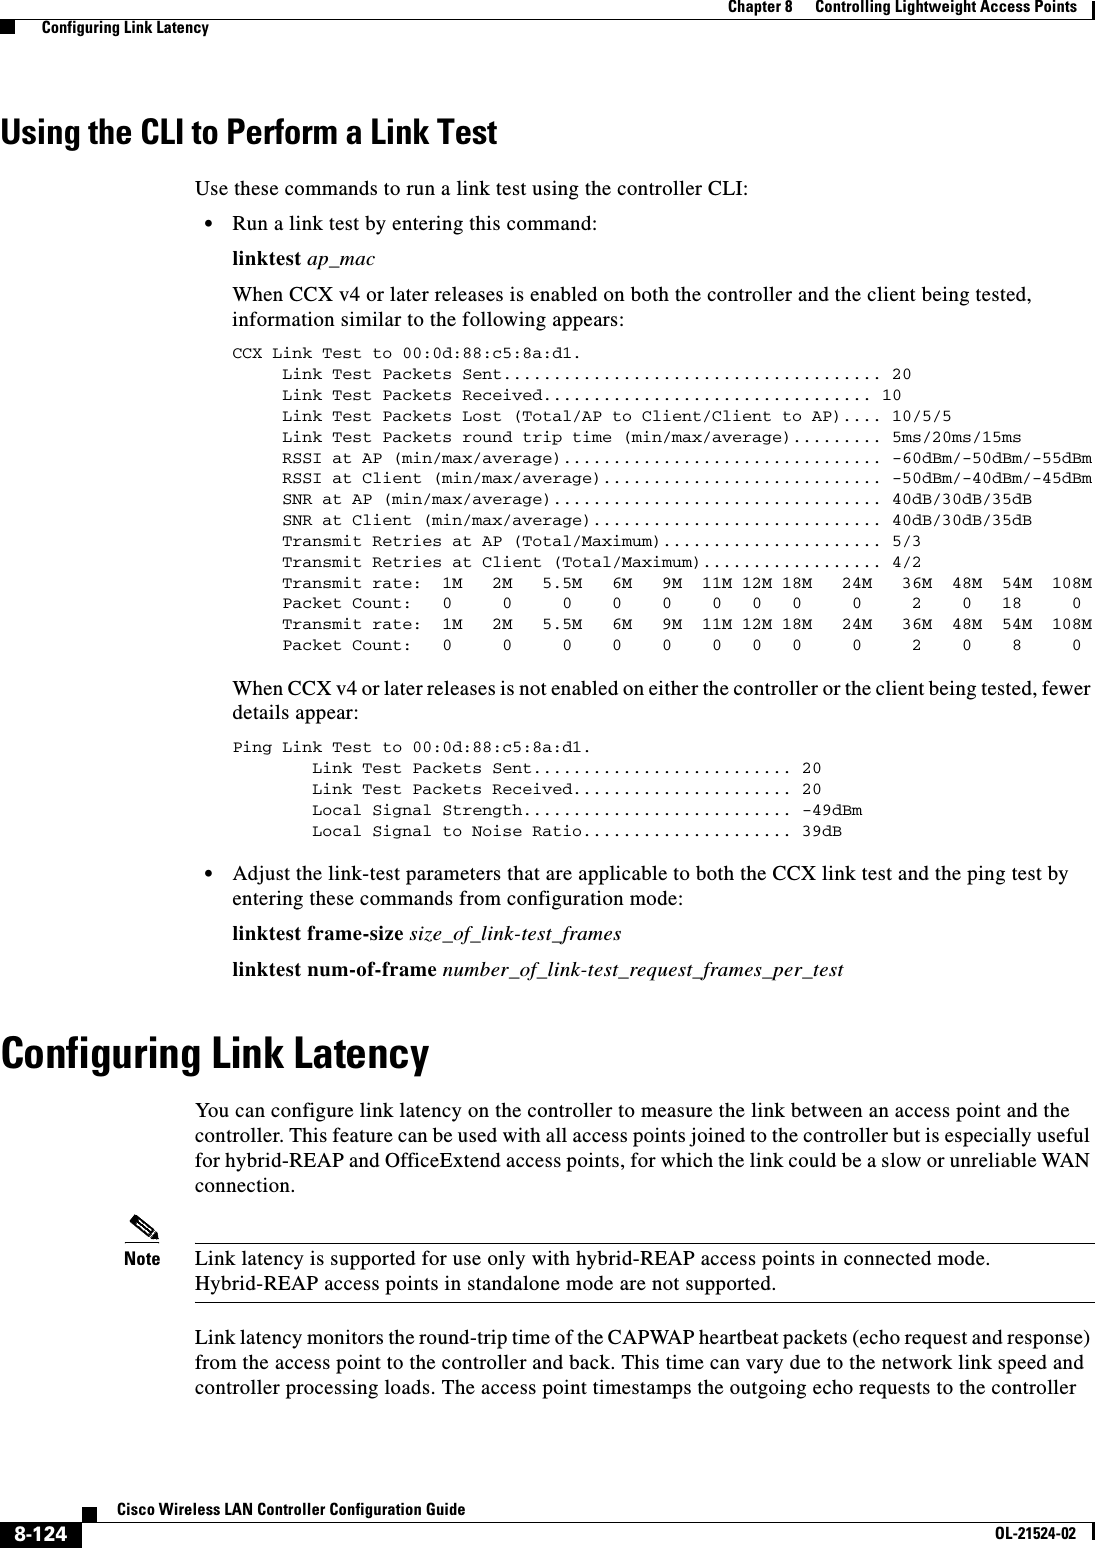  8-124Cisco Wireless LAN Controller Configuration GuideOL-21524-02Chapter 8      Controlling Lightweight Access Points  Configuring Link LatencyUsing the CLI to Perform a Link TestUse these commands to run a link test using the controller CLI:  • Run a link test by entering this command:linktest ap_macWhen CCX v4 or later releases is enabled on both the controller and the client being tested, information similar to the following appears:CCX Link Test to 00:0d:88:c5:8a:d1.     Link Test Packets Sent...................................... 20     Link Test Packets Received................................. 10     Link Test Packets Lost (Total/AP to Client/Client to AP).... 10/5/5     Link Test Packets round trip time (min/max/average)......... 5ms/20ms/15ms     RSSI at AP (min/max/average)................................ -60dBm/-50dBm/-55dBm     RSSI at Client (min/max/average)............................ -50dBm/-40dBm/-45dBm     SNR at AP (min/max/average)................................. 40dB/30dB/35dB     SNR at Client (min/max/average)............................. 40dB/30dB/35dB     Transmit Retries at AP (Total/Maximum)...................... 5/3     Transmit Retries at Client (Total/Maximum).................. 4/2     Transmit rate:  1M   2M   5.5M   6M   9M  11M 12M 18M   24M   36M  48M  54M  108M     Packet Count:   0     0     0    0    0    0   0   0     0     2    0   18     0     Transmit rate:  1M   2M   5.5M   6M   9M  11M 12M 18M   24M   36M  48M  54M  108M     Packet Count:   0     0     0    0    0    0   0   0     0     2    0    8     0When CCX v4 or later releases is not enabled on either the controller or the client being tested, fewer details appear:Ping Link Test to 00:0d:88:c5:8a:d1.        Link Test Packets Sent.......................... 20        Link Test Packets Received...................... 20        Local Signal Strength........................... -49dBm        Local Signal to Noise Ratio..................... 39dB  • Adjust the link-test parameters that are applicable to both the CCX link test and the ping test by entering these commands from configuration mode:linktest frame-size size_of_link-test_frameslinktest num-of-frame number_of_link-test_request_frames_per_testConfiguring Link LatencyYou can configure link latency on the controller to measure the link between an access point and the controller. This feature can be used with all access points joined to the controller but is especially useful for hybrid-REAP and OfficeExtend access points, for which the link could be a slow or unreliable WAN connection.Note Link latency is supported for use only with hybrid-REAP access points in connected mode. Hybrid-REAP access points in standalone mode are not supported.Link latency monitors the round-trip time of the CAPWAP heartbeat packets (echo request and response) from the access point to the controller and back. This time can vary due to the network link speed and controller processing loads. The access point timestamps the outgoing echo requests to the controller 